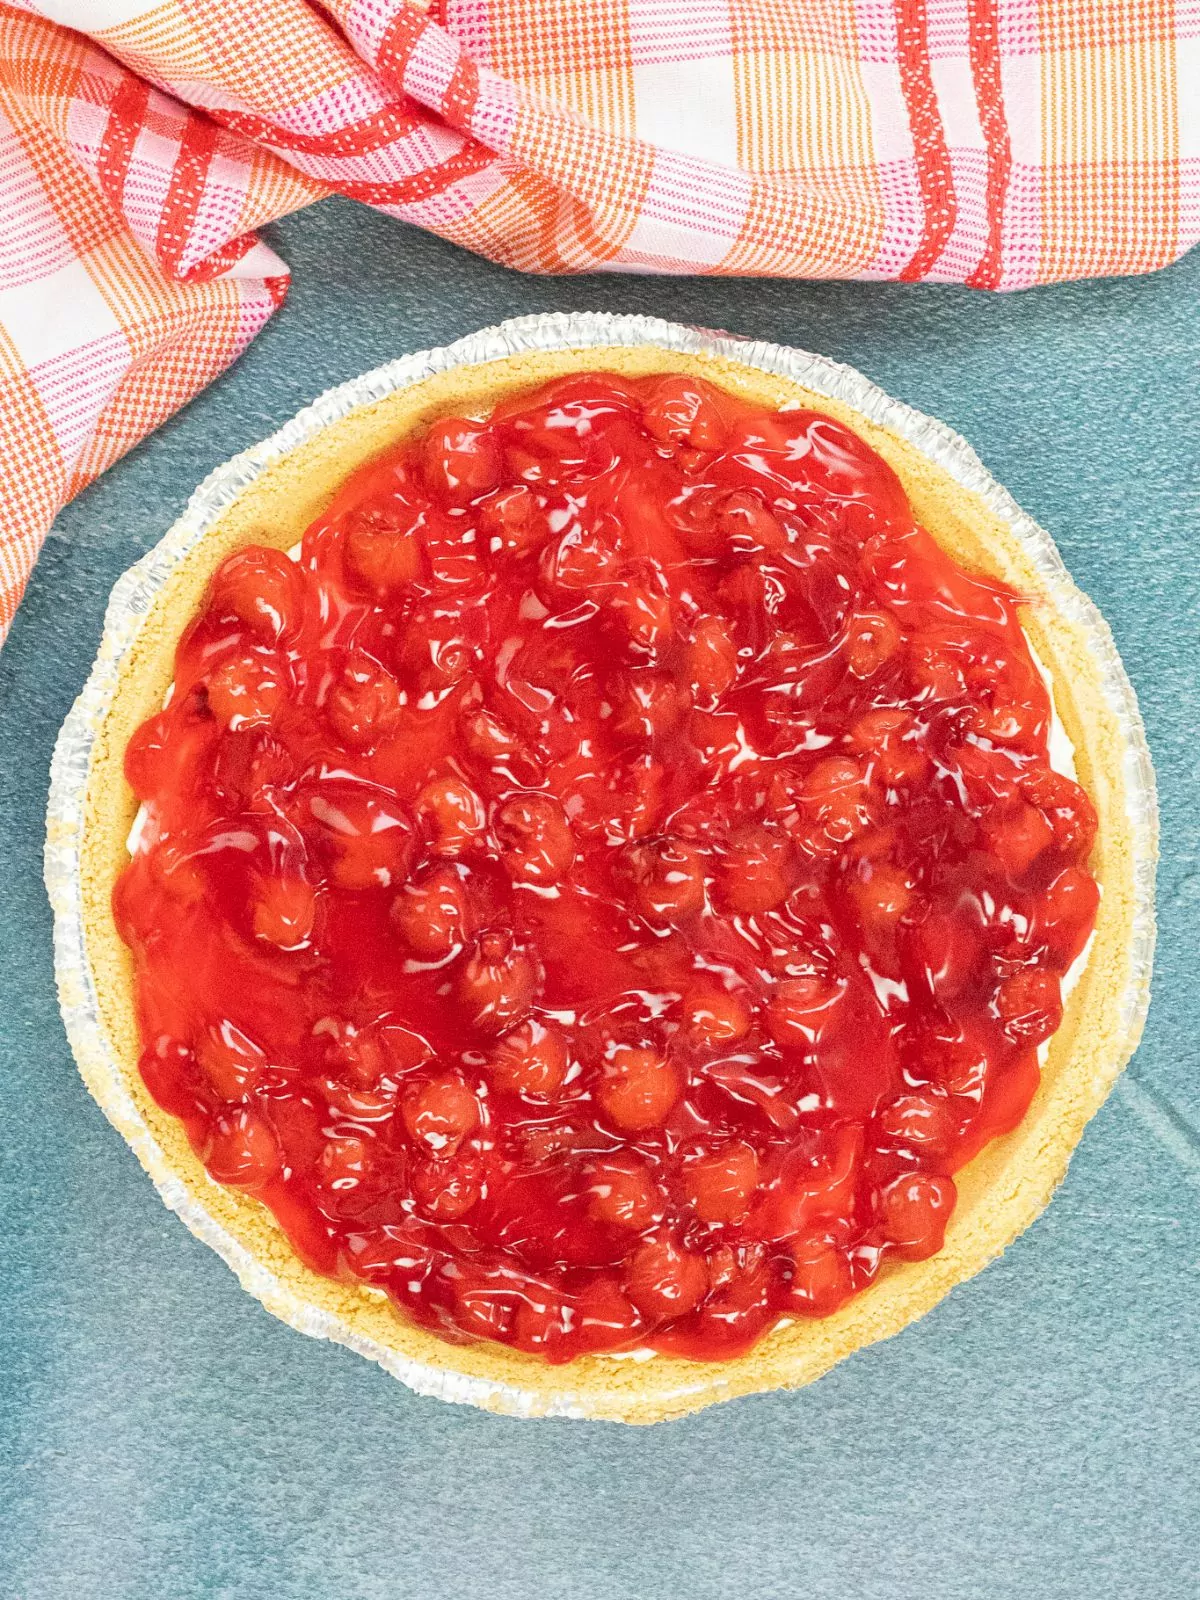 Cherry pie filling on top of no bake cheesecake pie.